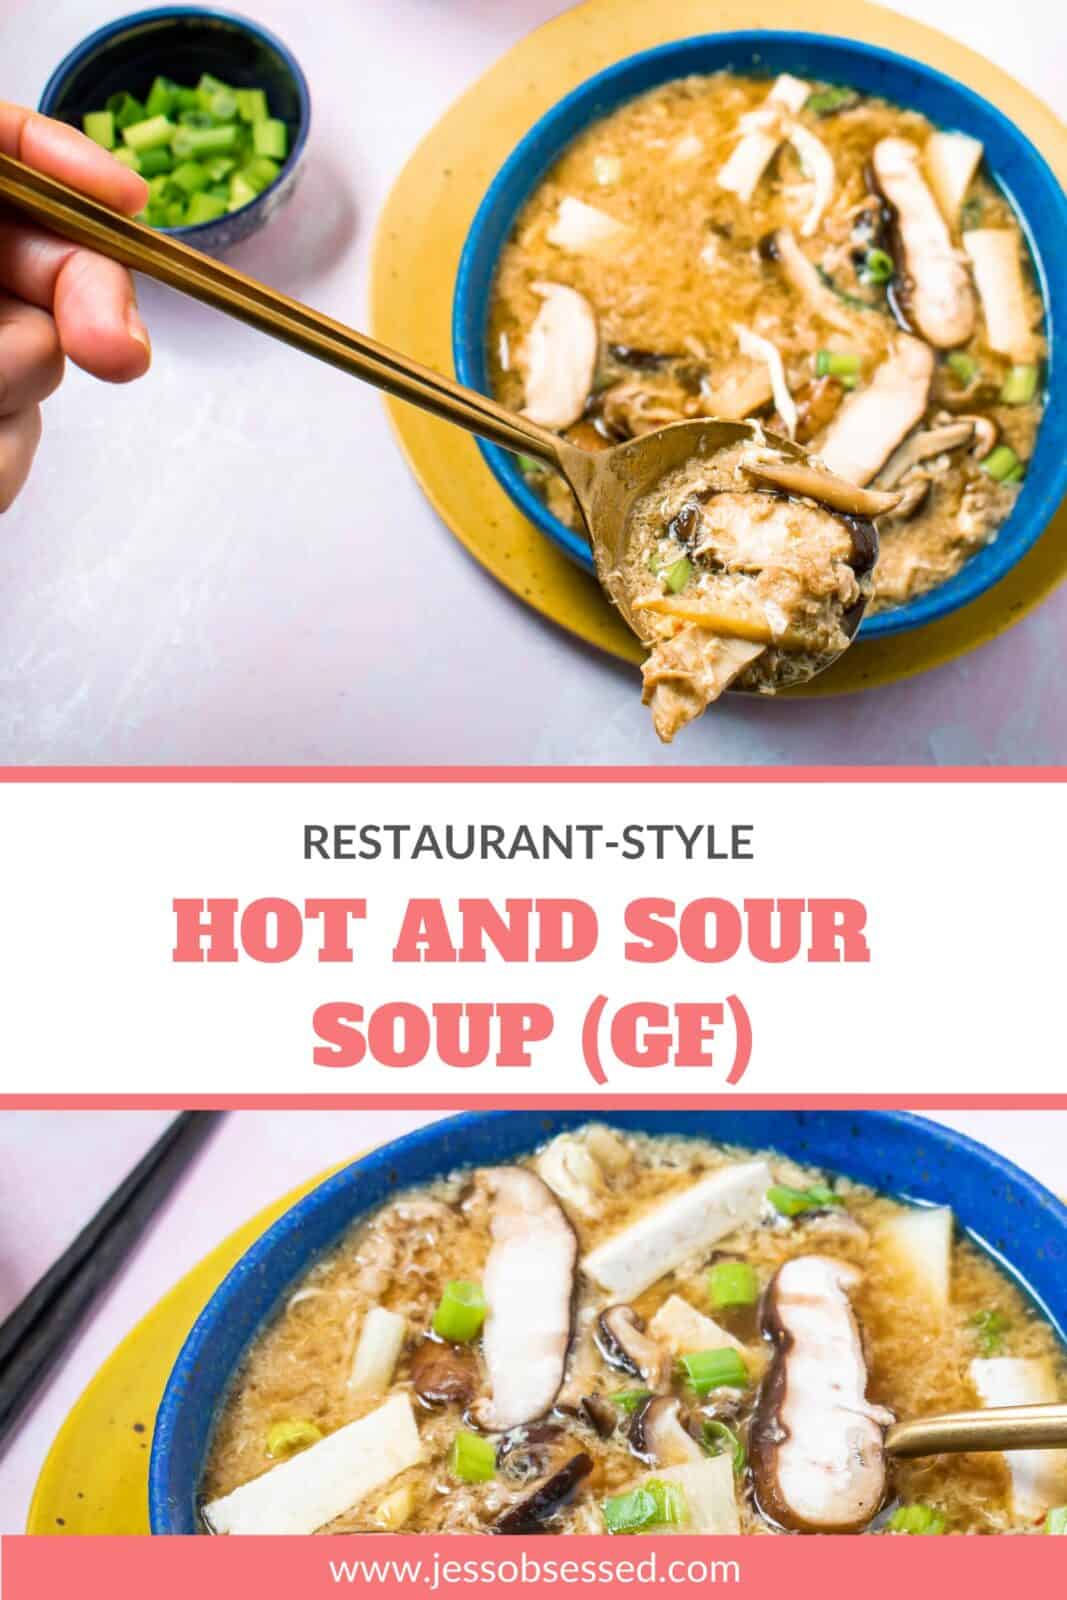 Restaurant style homemade gluten-free hot and sour soup recipe -better than takeout! 